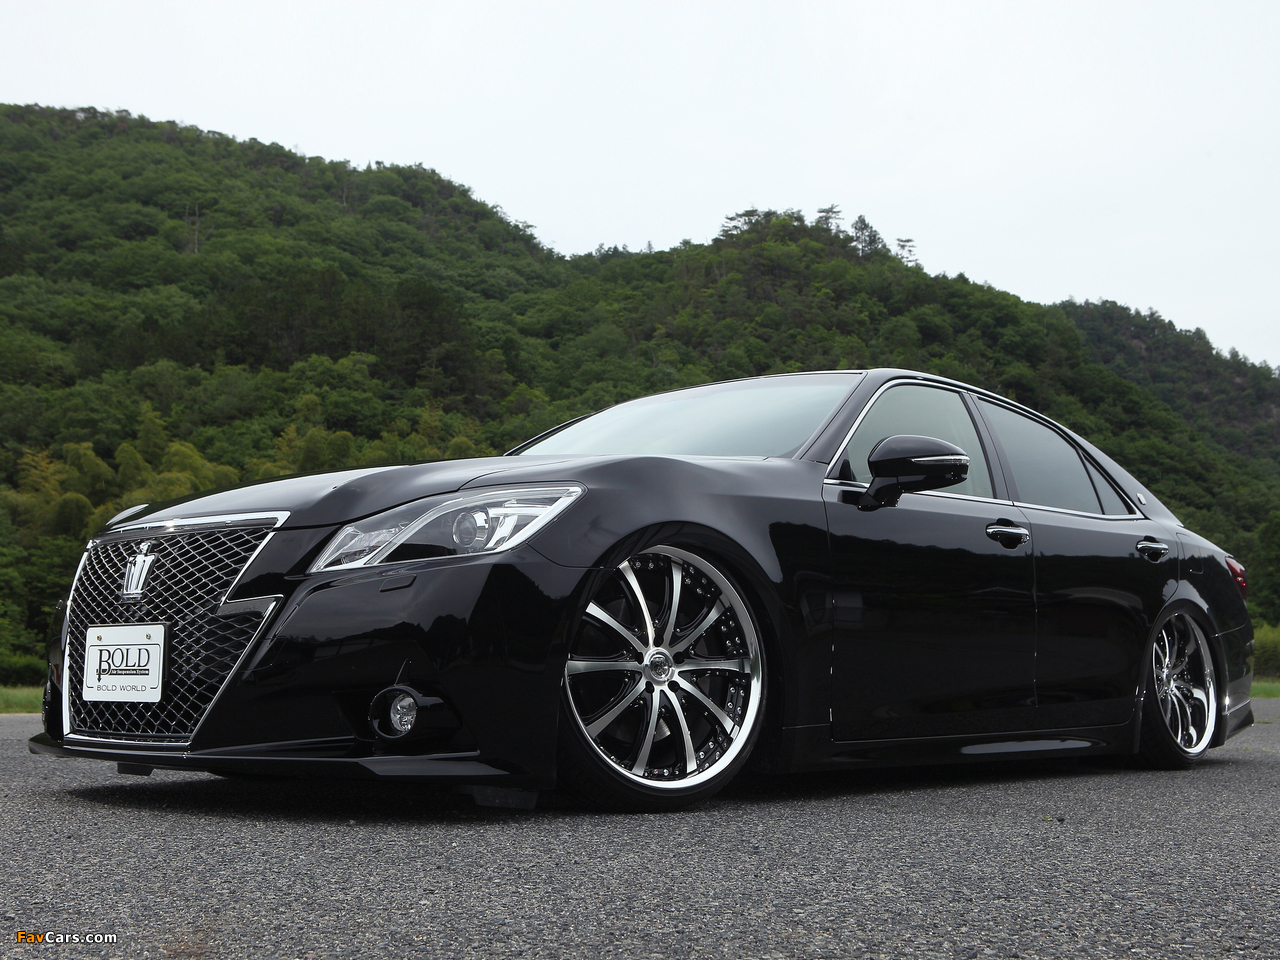 Bold World Toyota Crown Athlete (S210) 2012 pictures (1280 x 960)